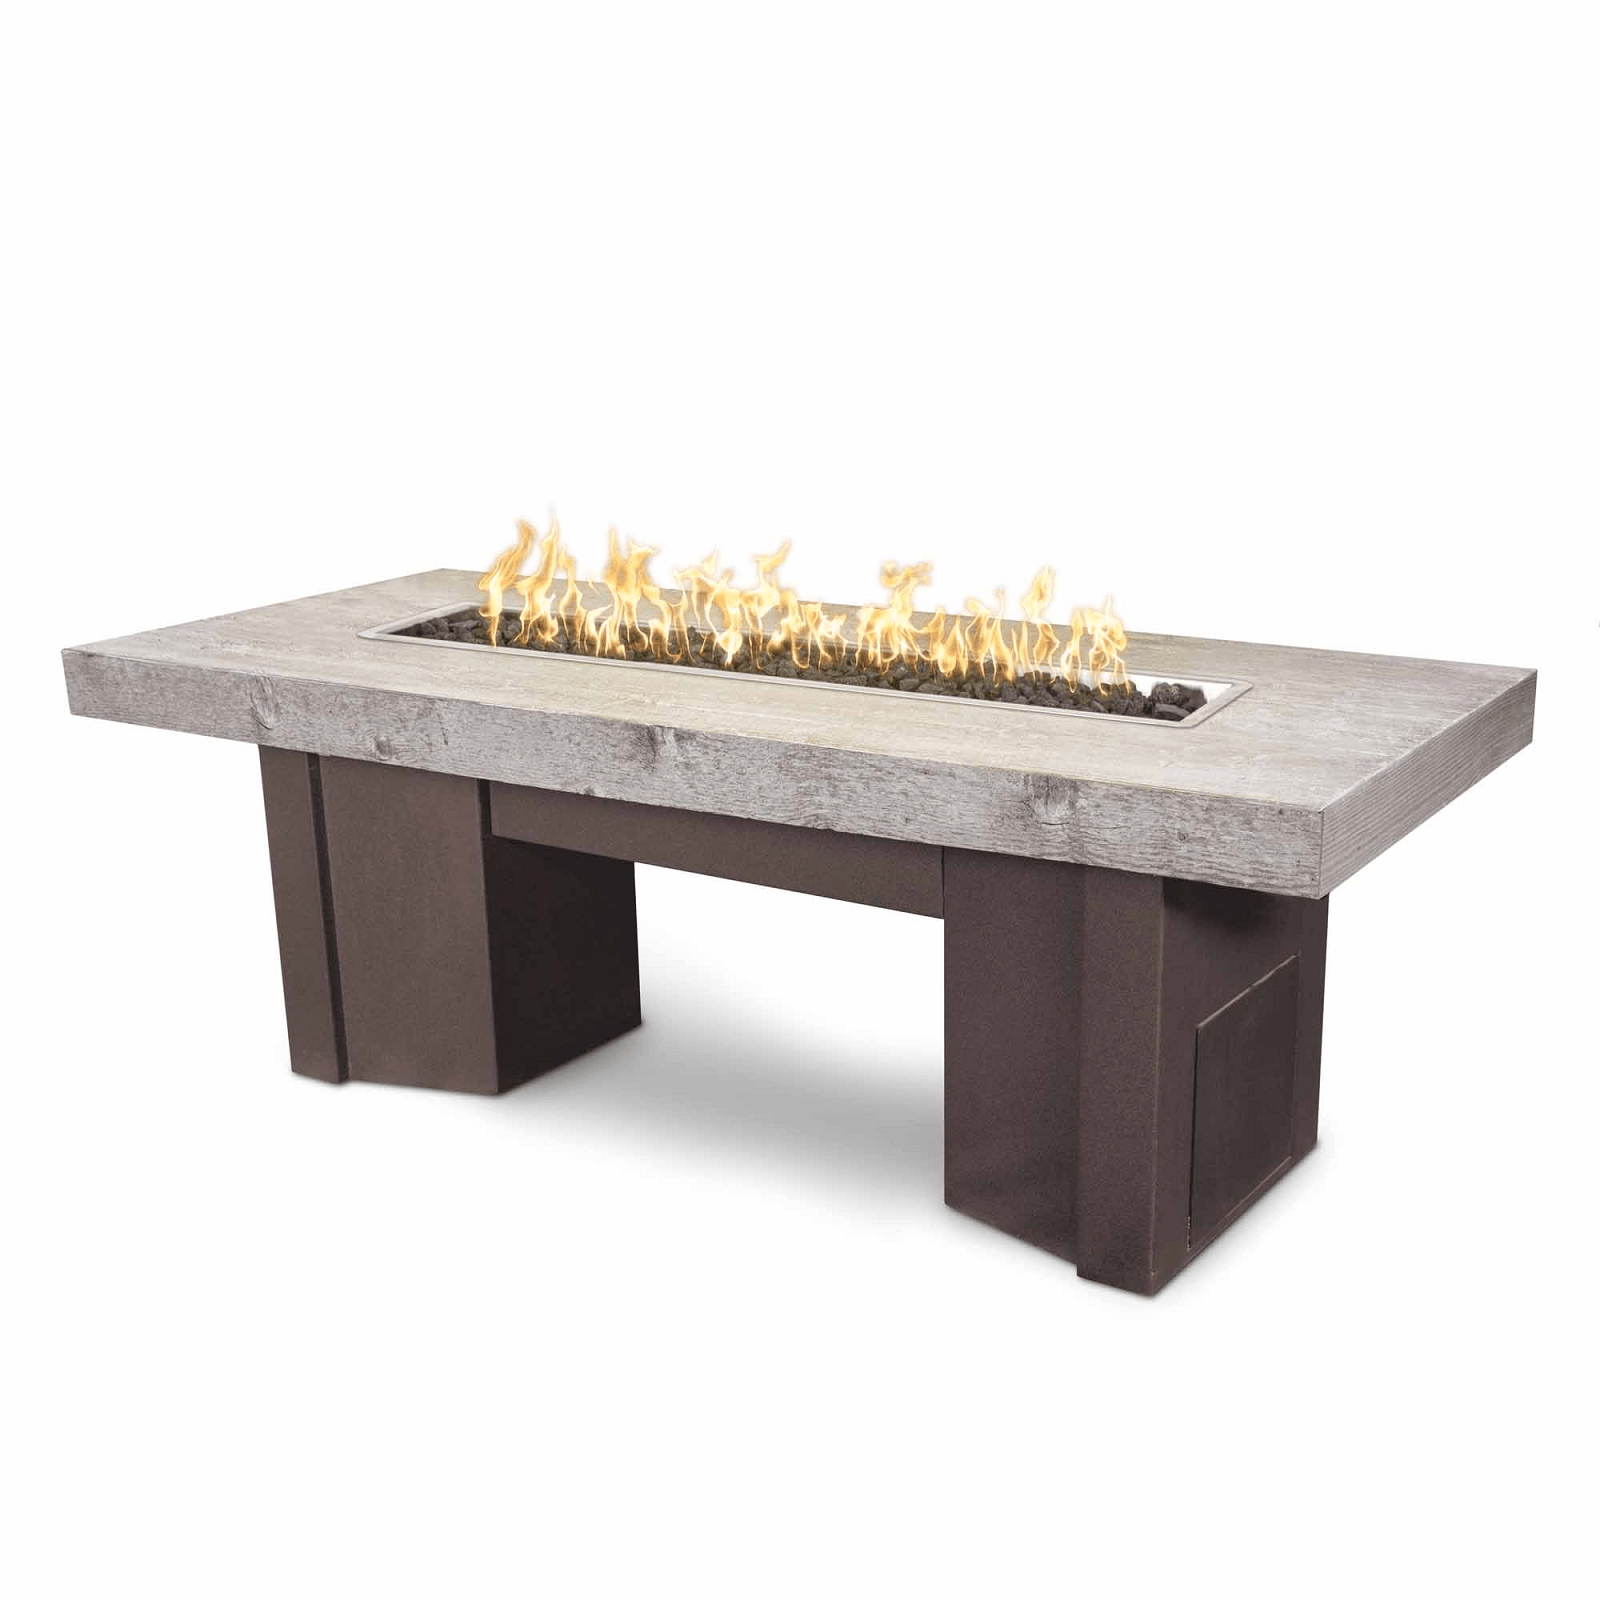 The Outdoor Plus Fire Features The Outdoor Plus 60" Alameda Fire Table Wood Grain - 110V Plug & Play Electronic Ignition / OPT-ALMWG60EKIT